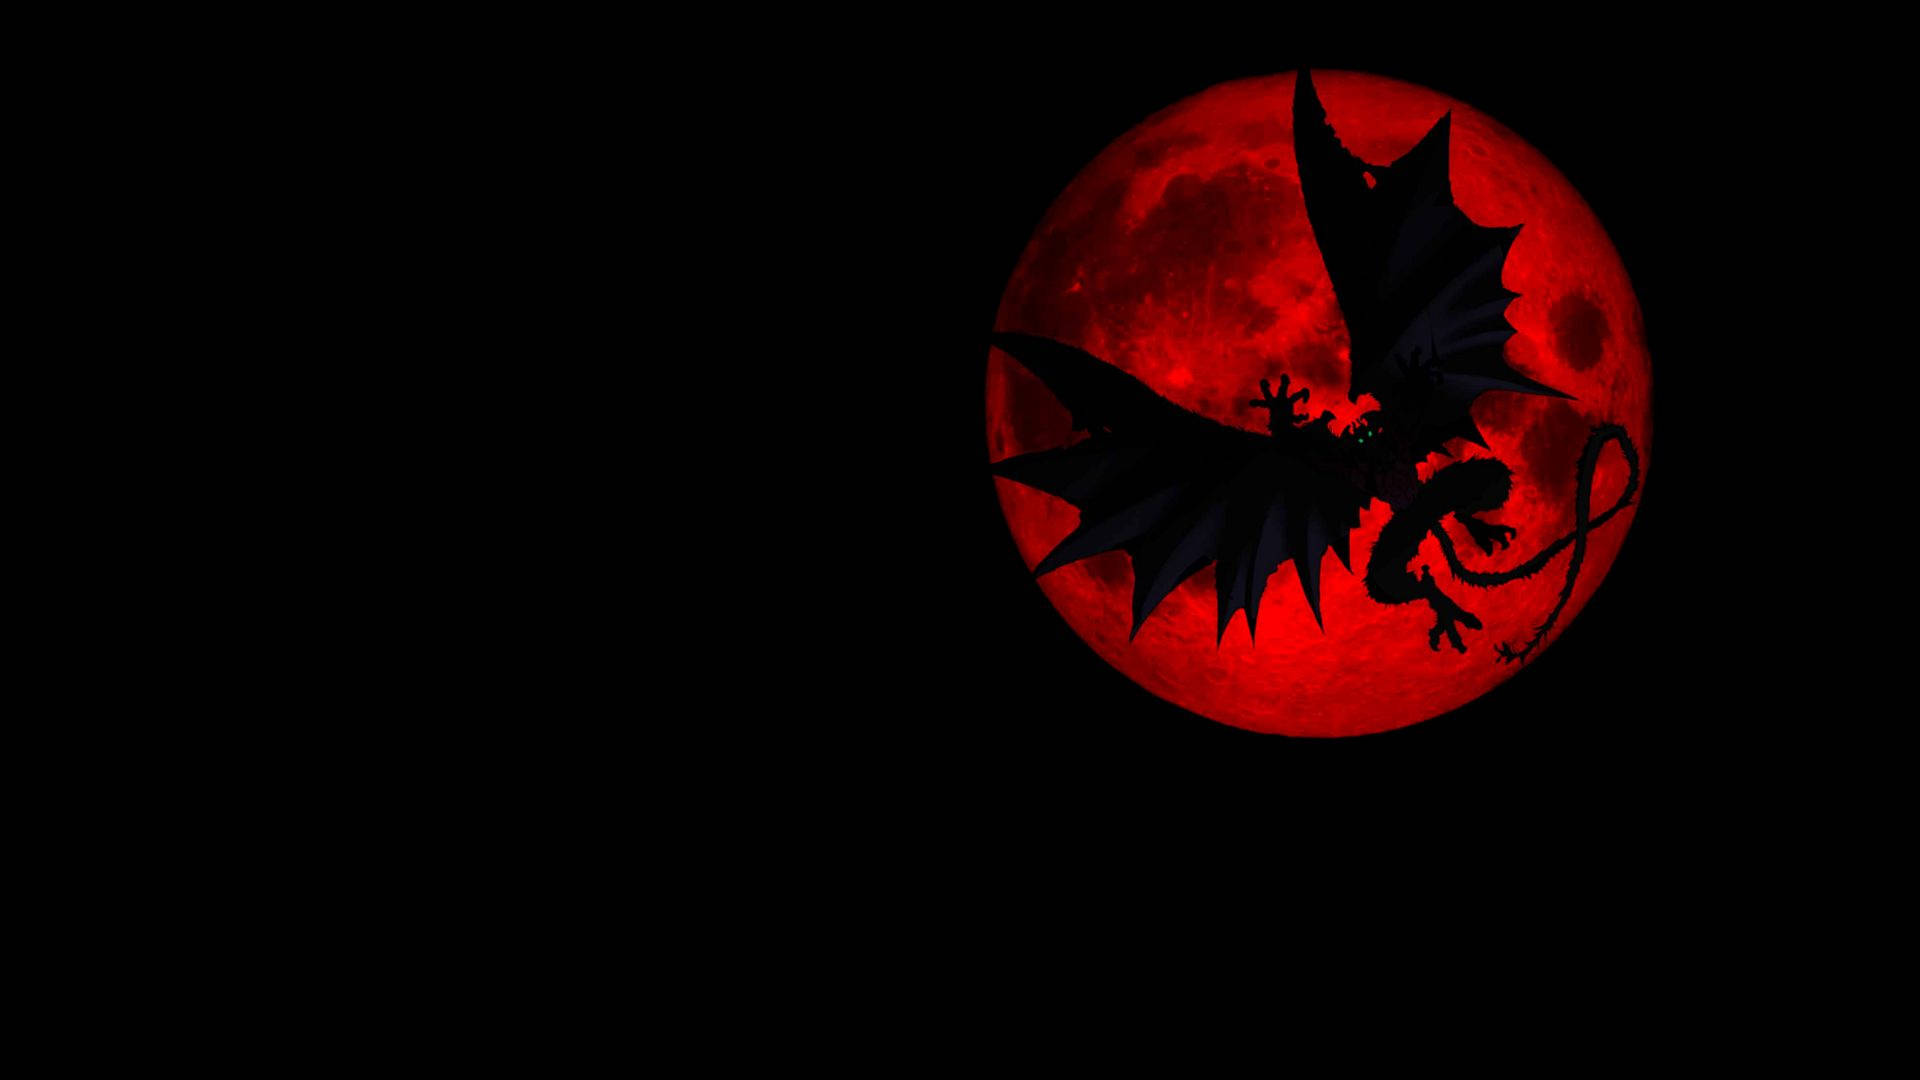 “The Red Moon Rises Over Devilman Crybaby” Wallpaper